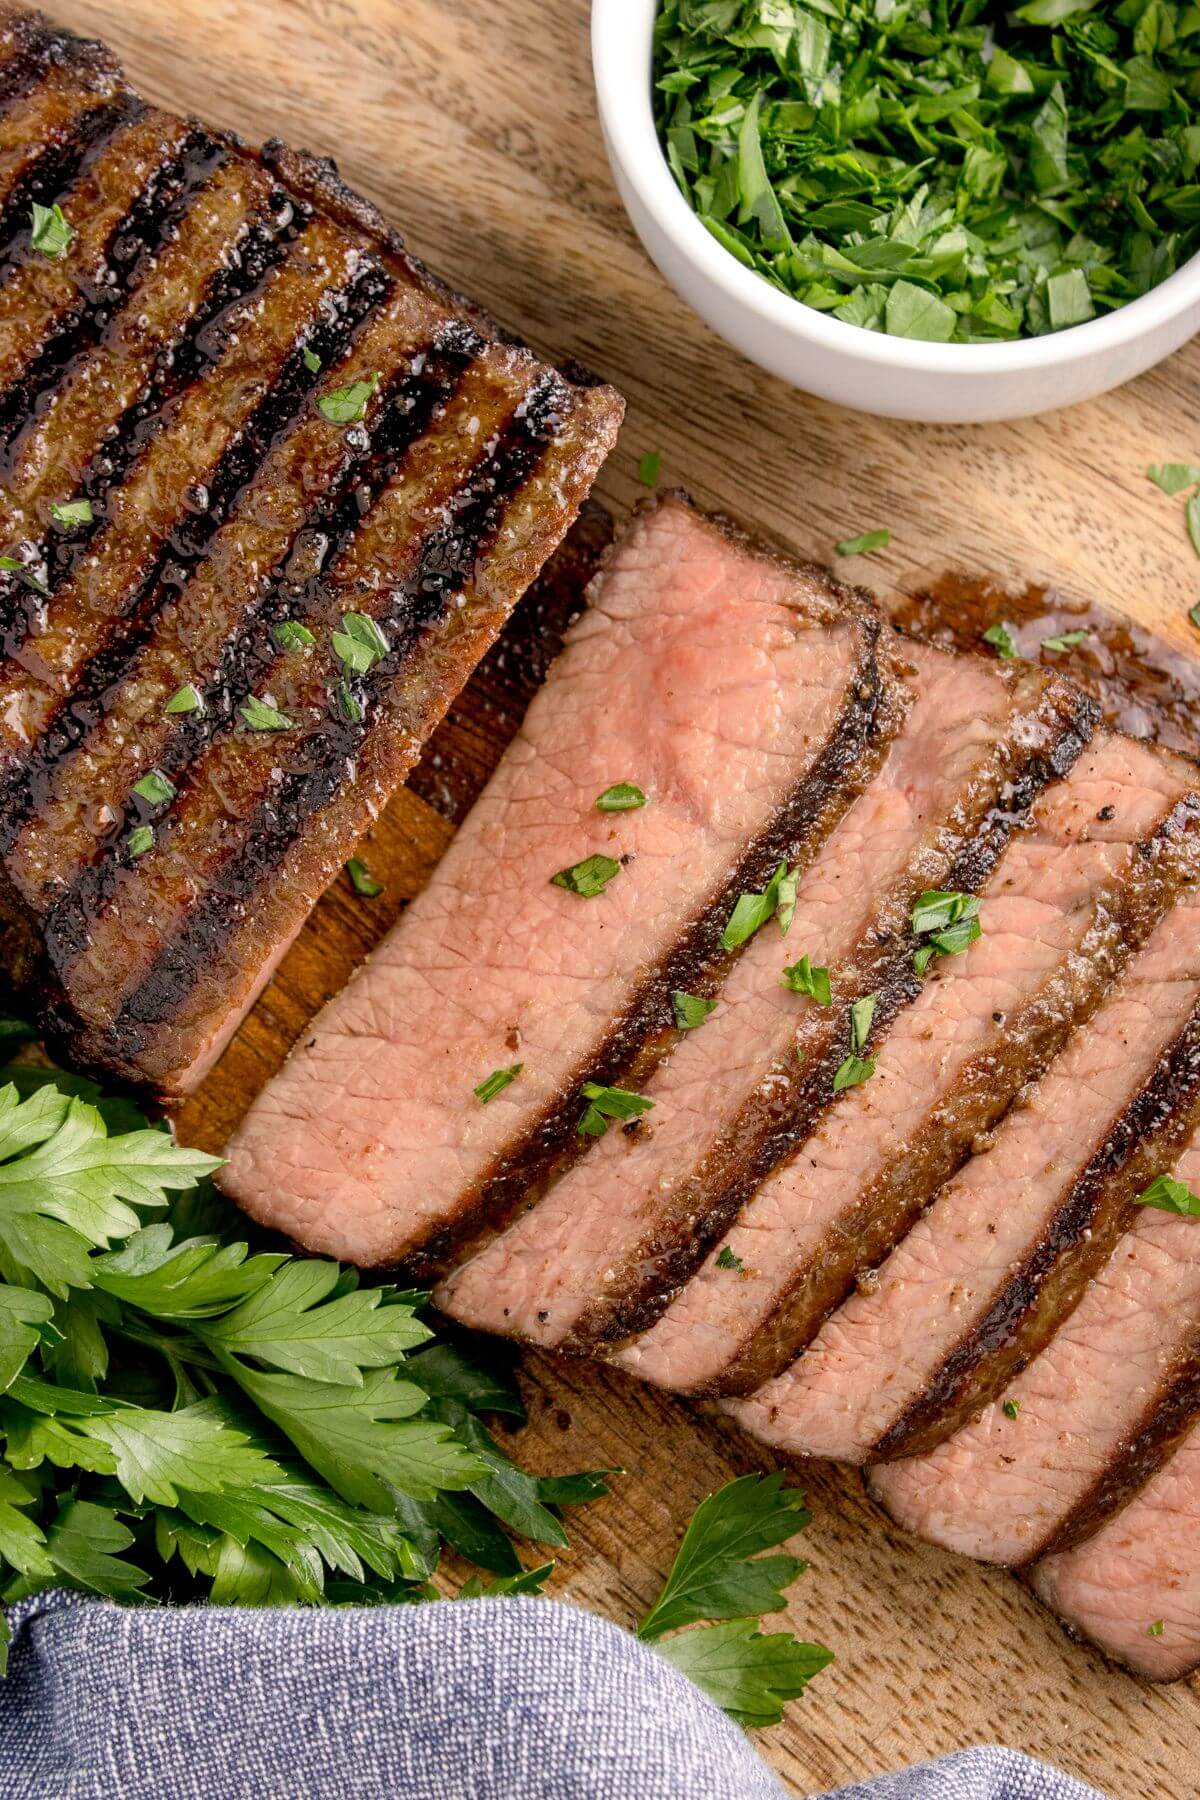 A cutting board is filled with steak slices and greens.